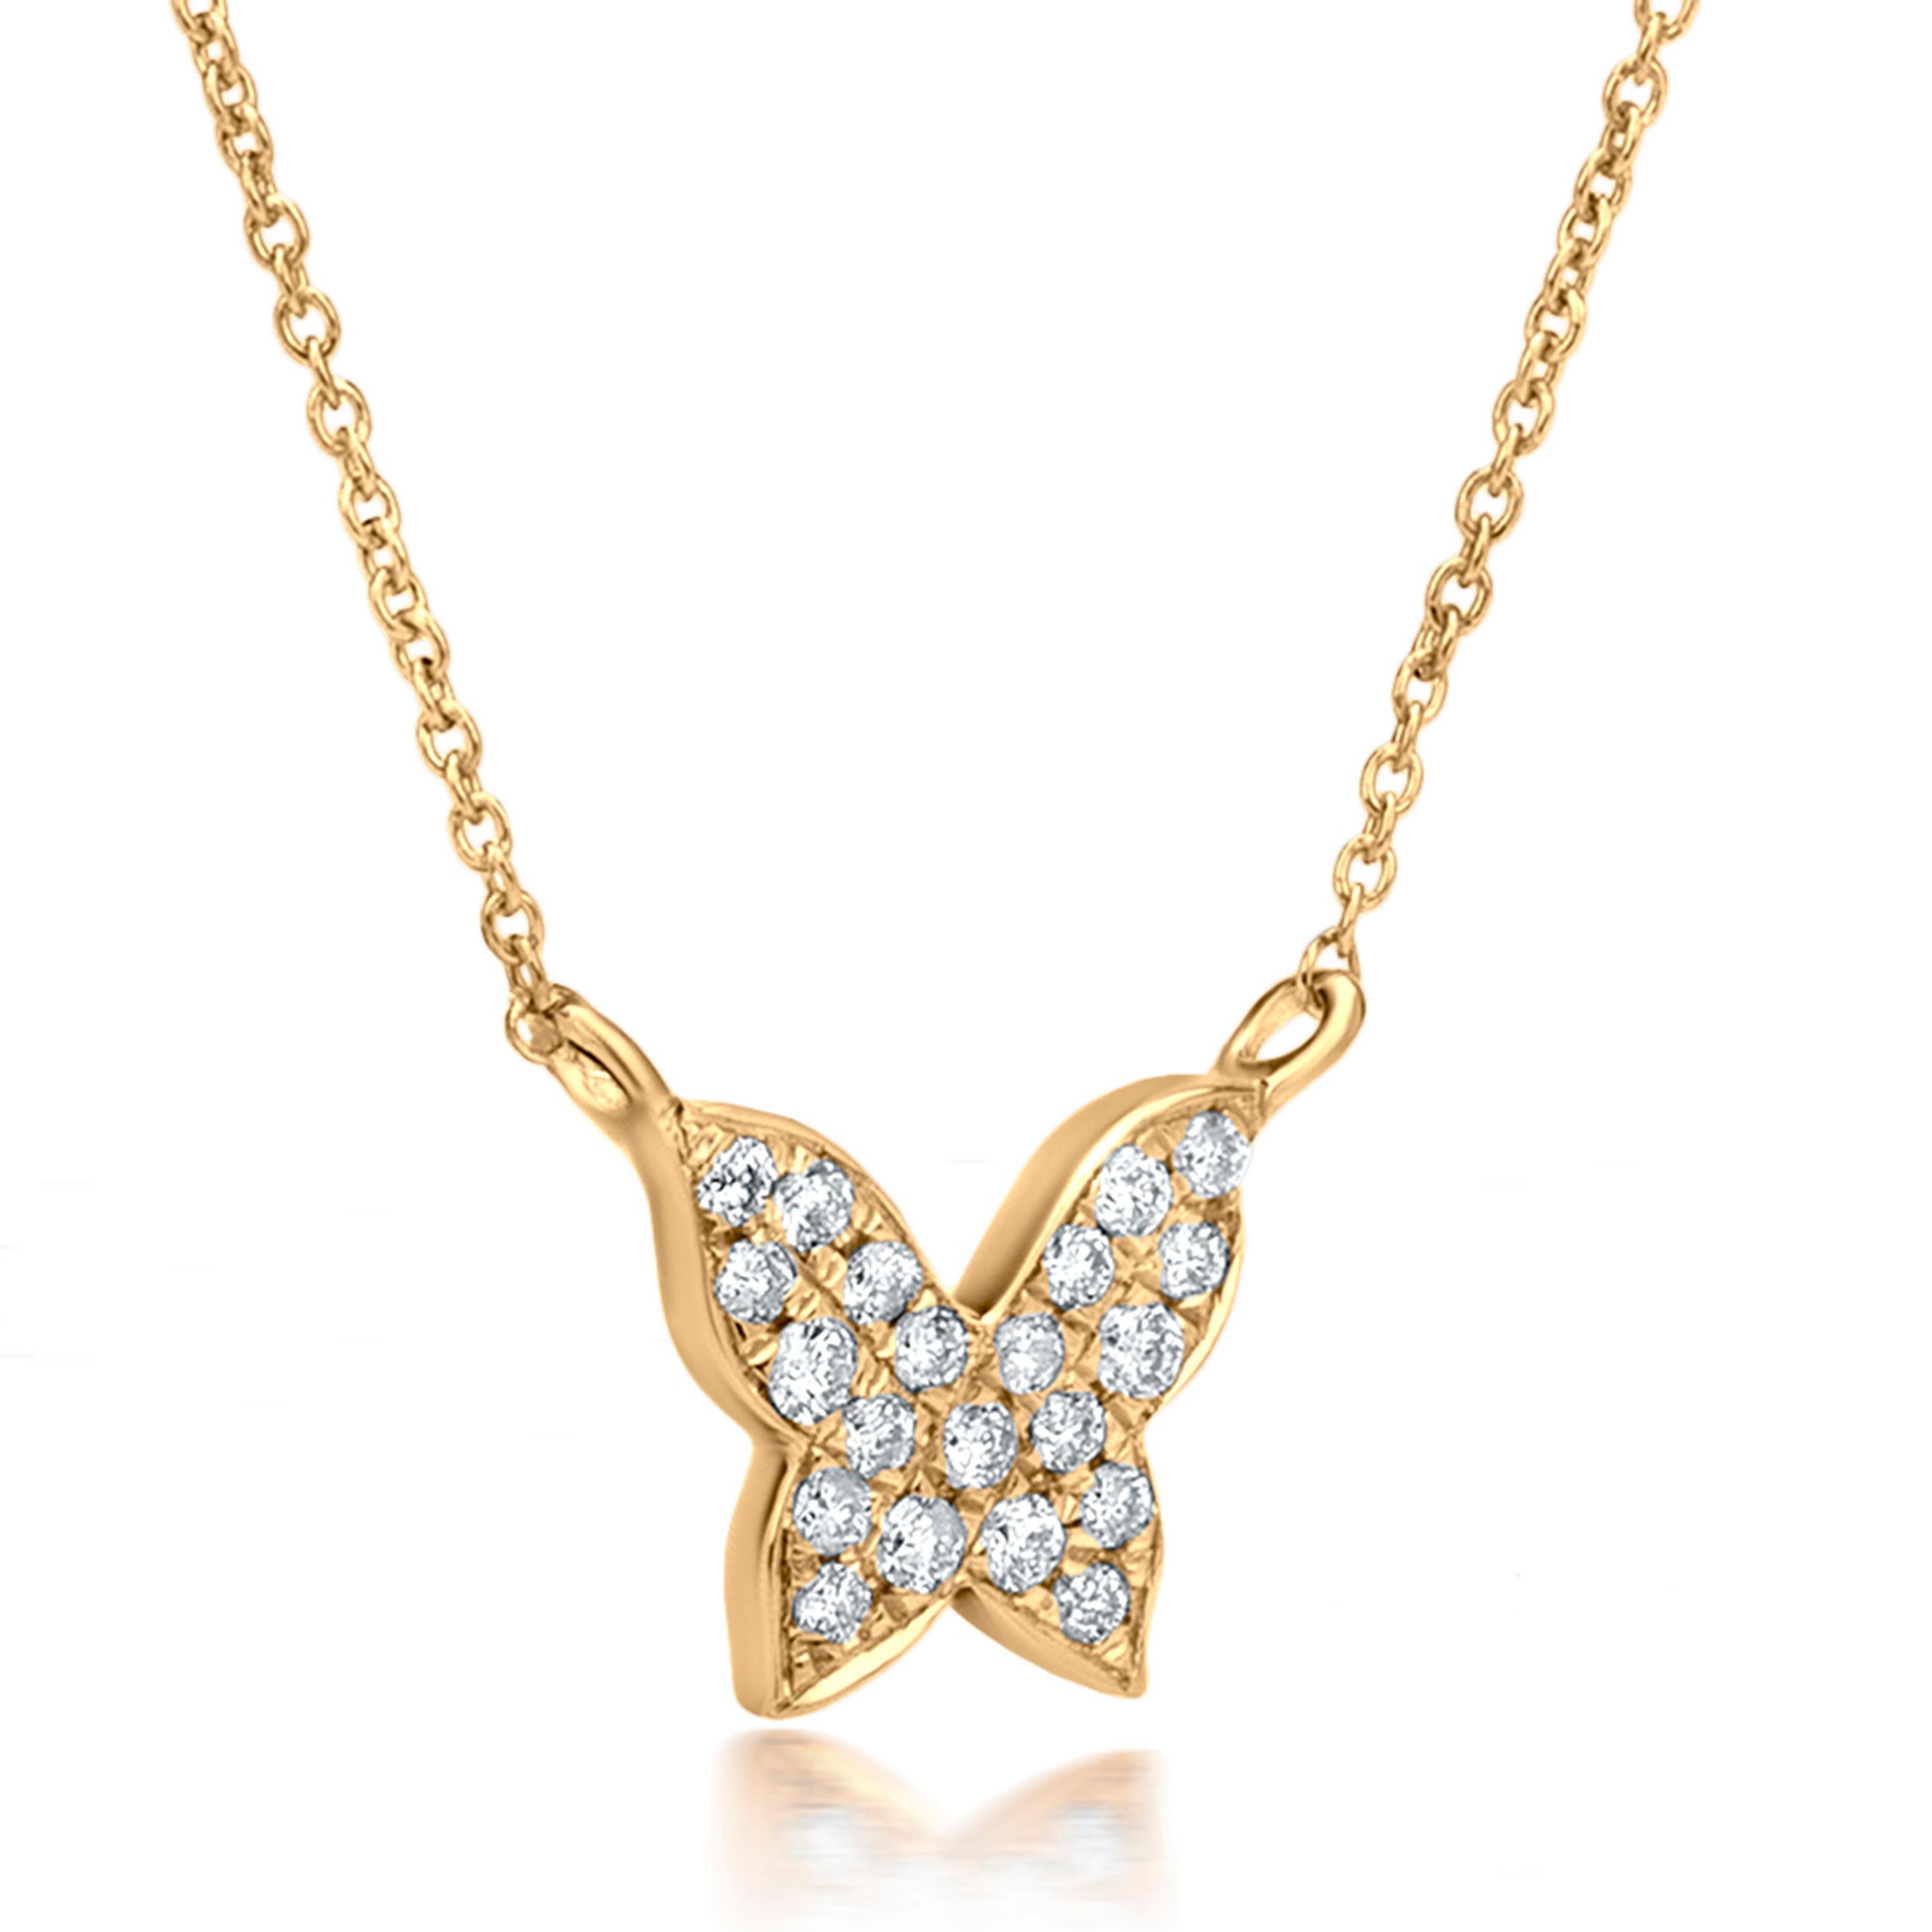 Contemporary Butterfly Diamond Pendant Necklace in 18k Yellow Gold